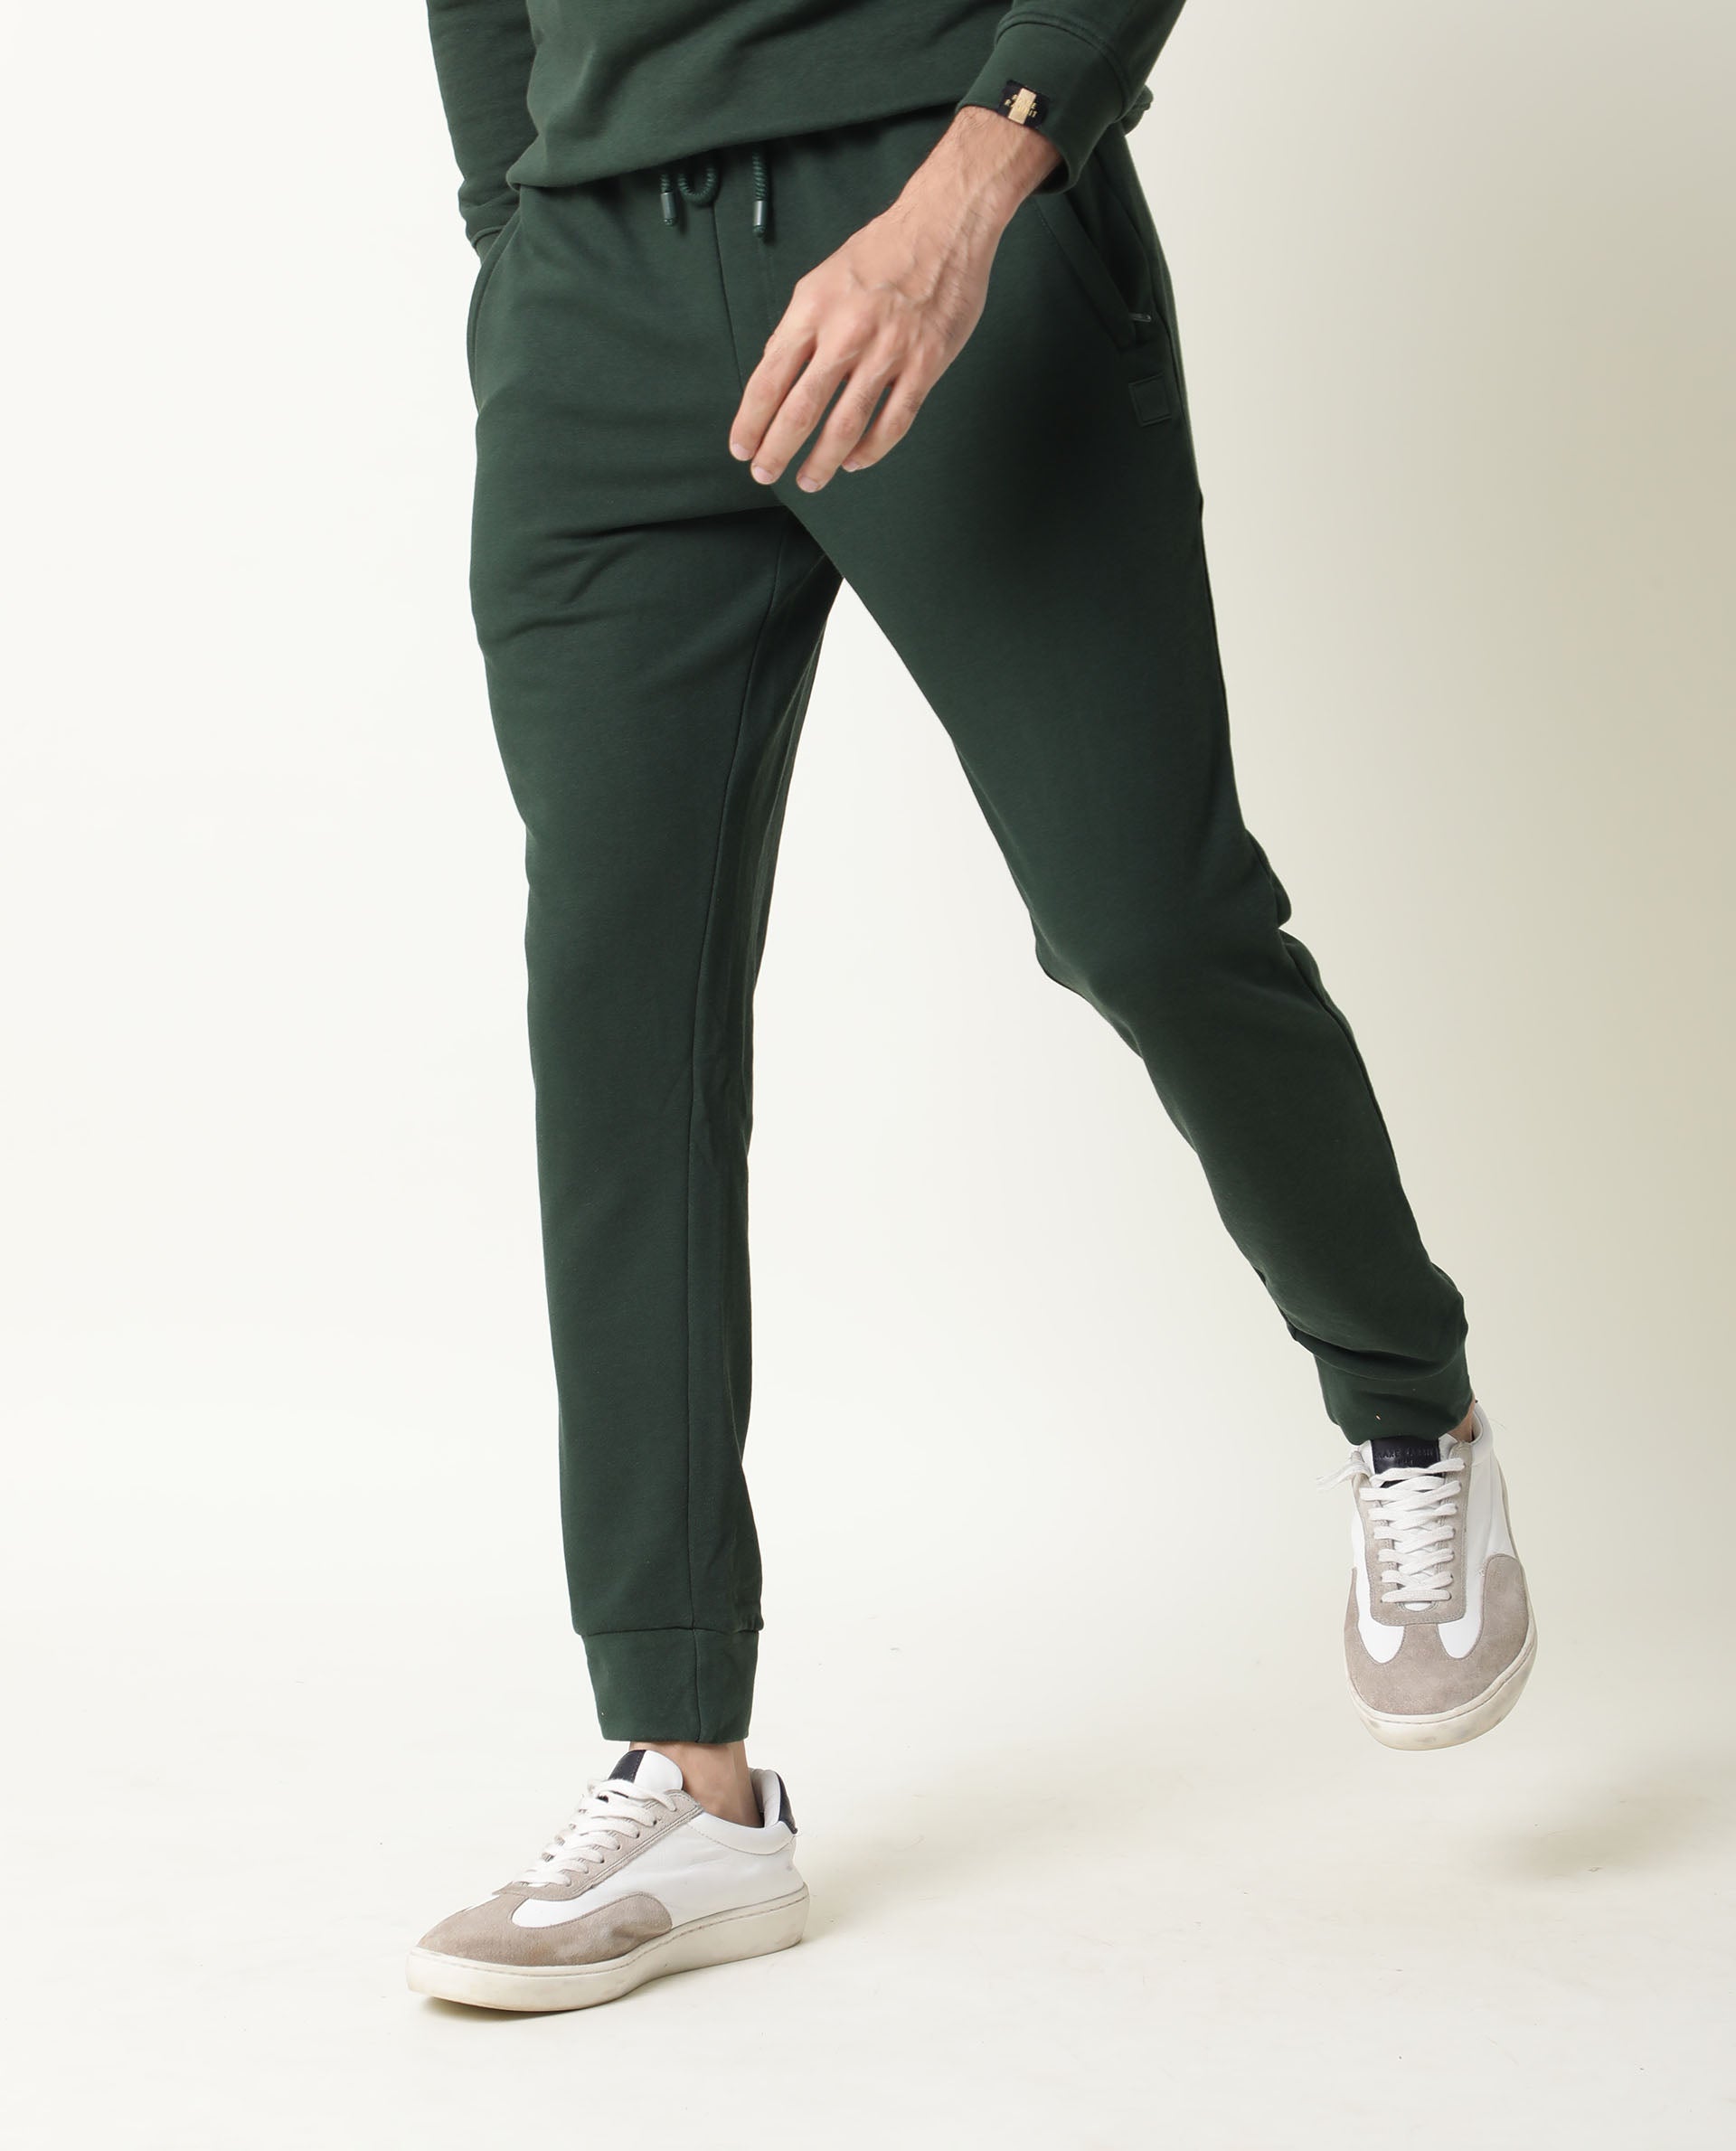 Jeans & Trousers | Its A Brand New Bell Bottom Dark Green Pants. I Have  Never Worn Them. Really Good Quality. Material Is Streachable, So Can Fit  To So Many Body Types.